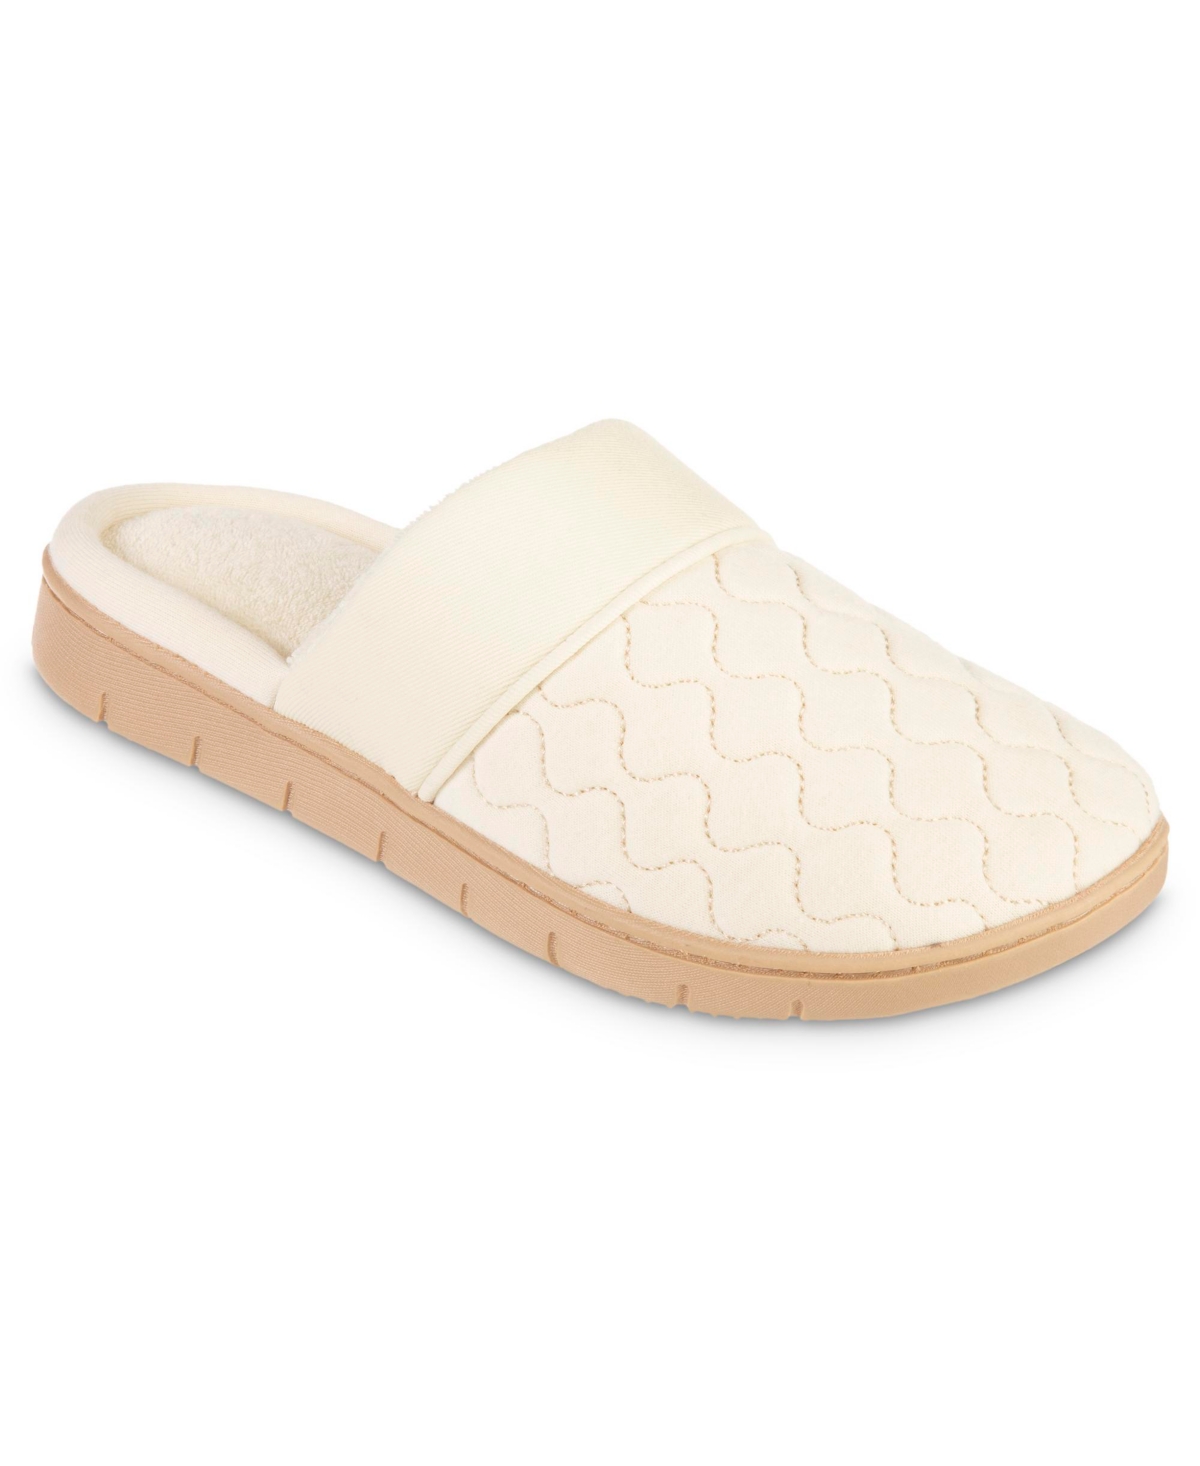 Women's Clean Water Clog - Sand Trap